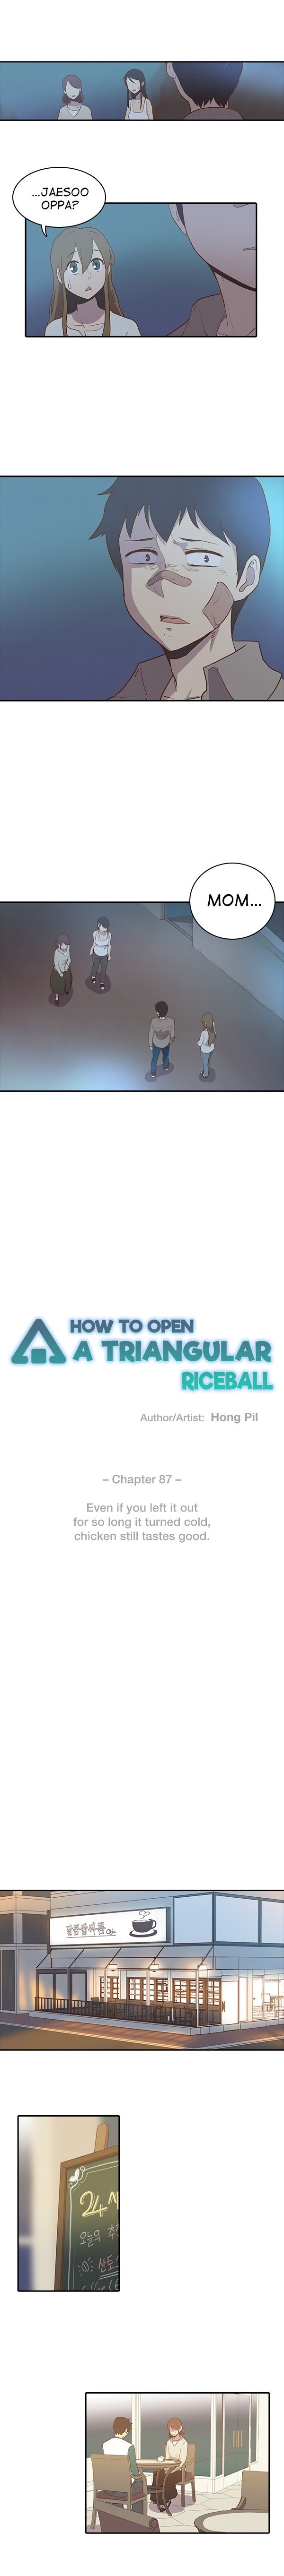 How to Open a Triangular Riceball - Chapter 87 Page 5